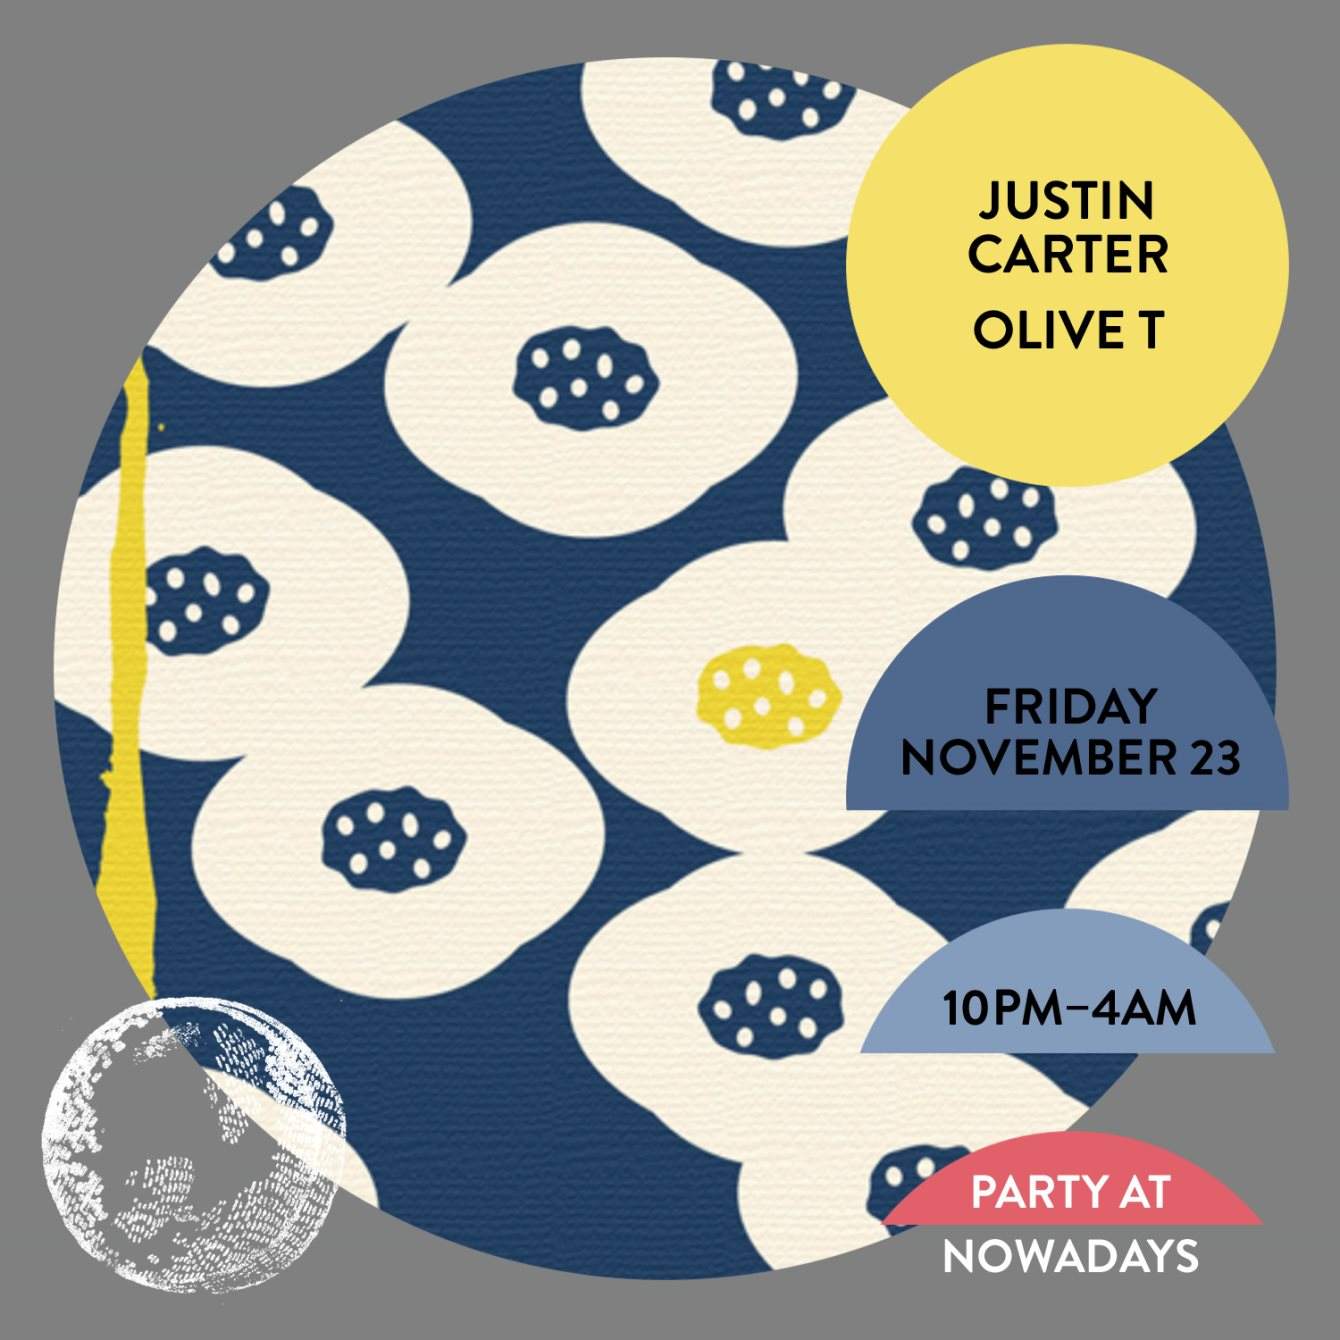 Party: Justin Carter and Olive T - Página trasera